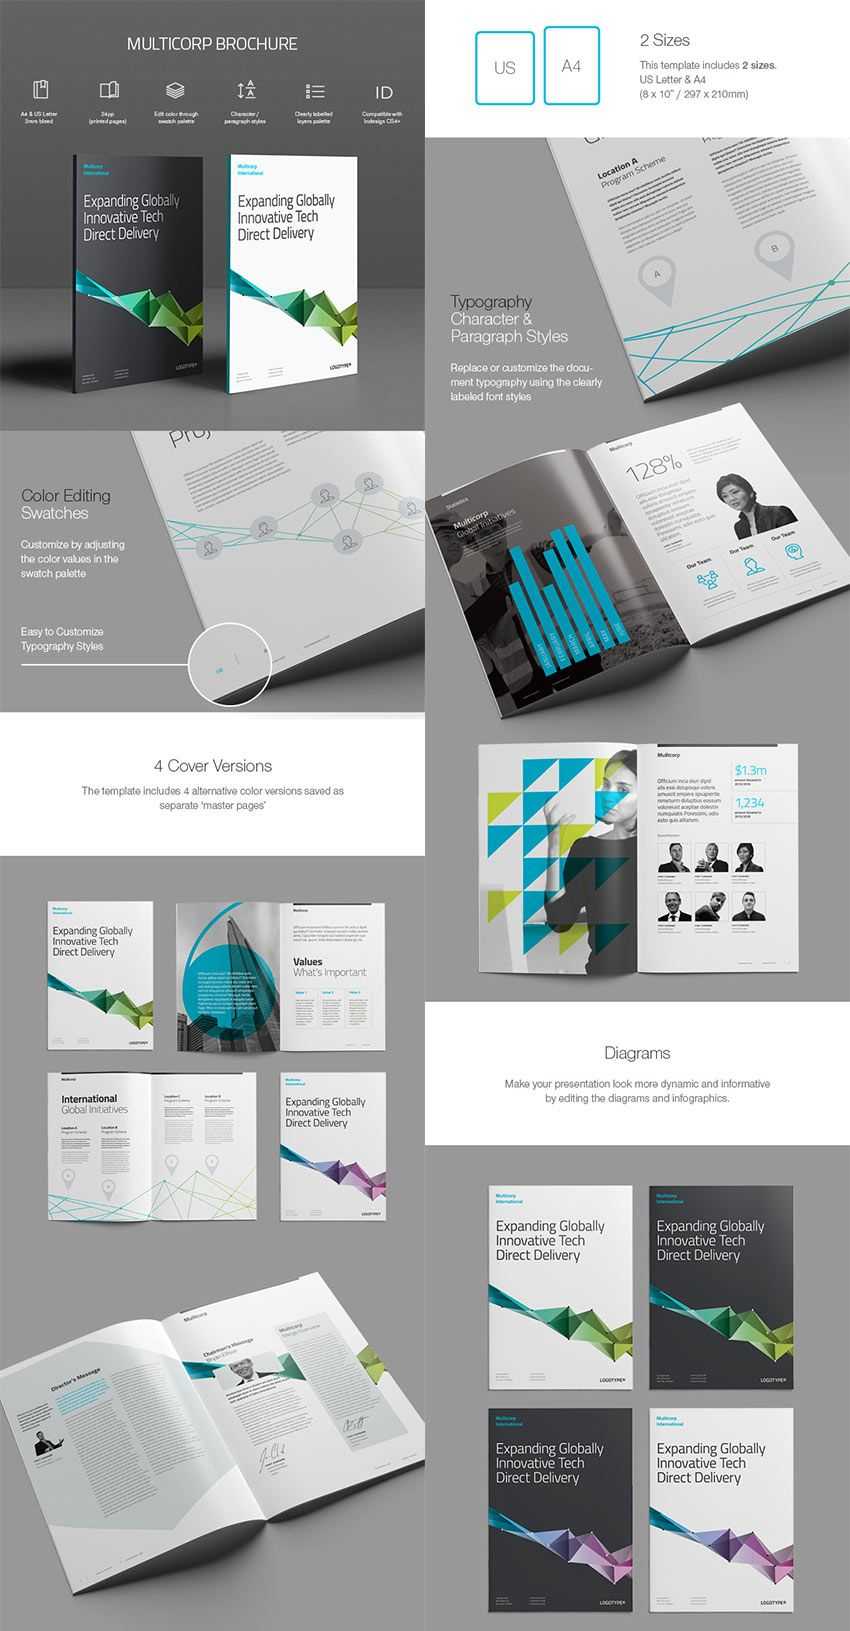 20 Best Indesign Brochure Templates – For Creative Business Within Brochure Templates Free Download Indesign